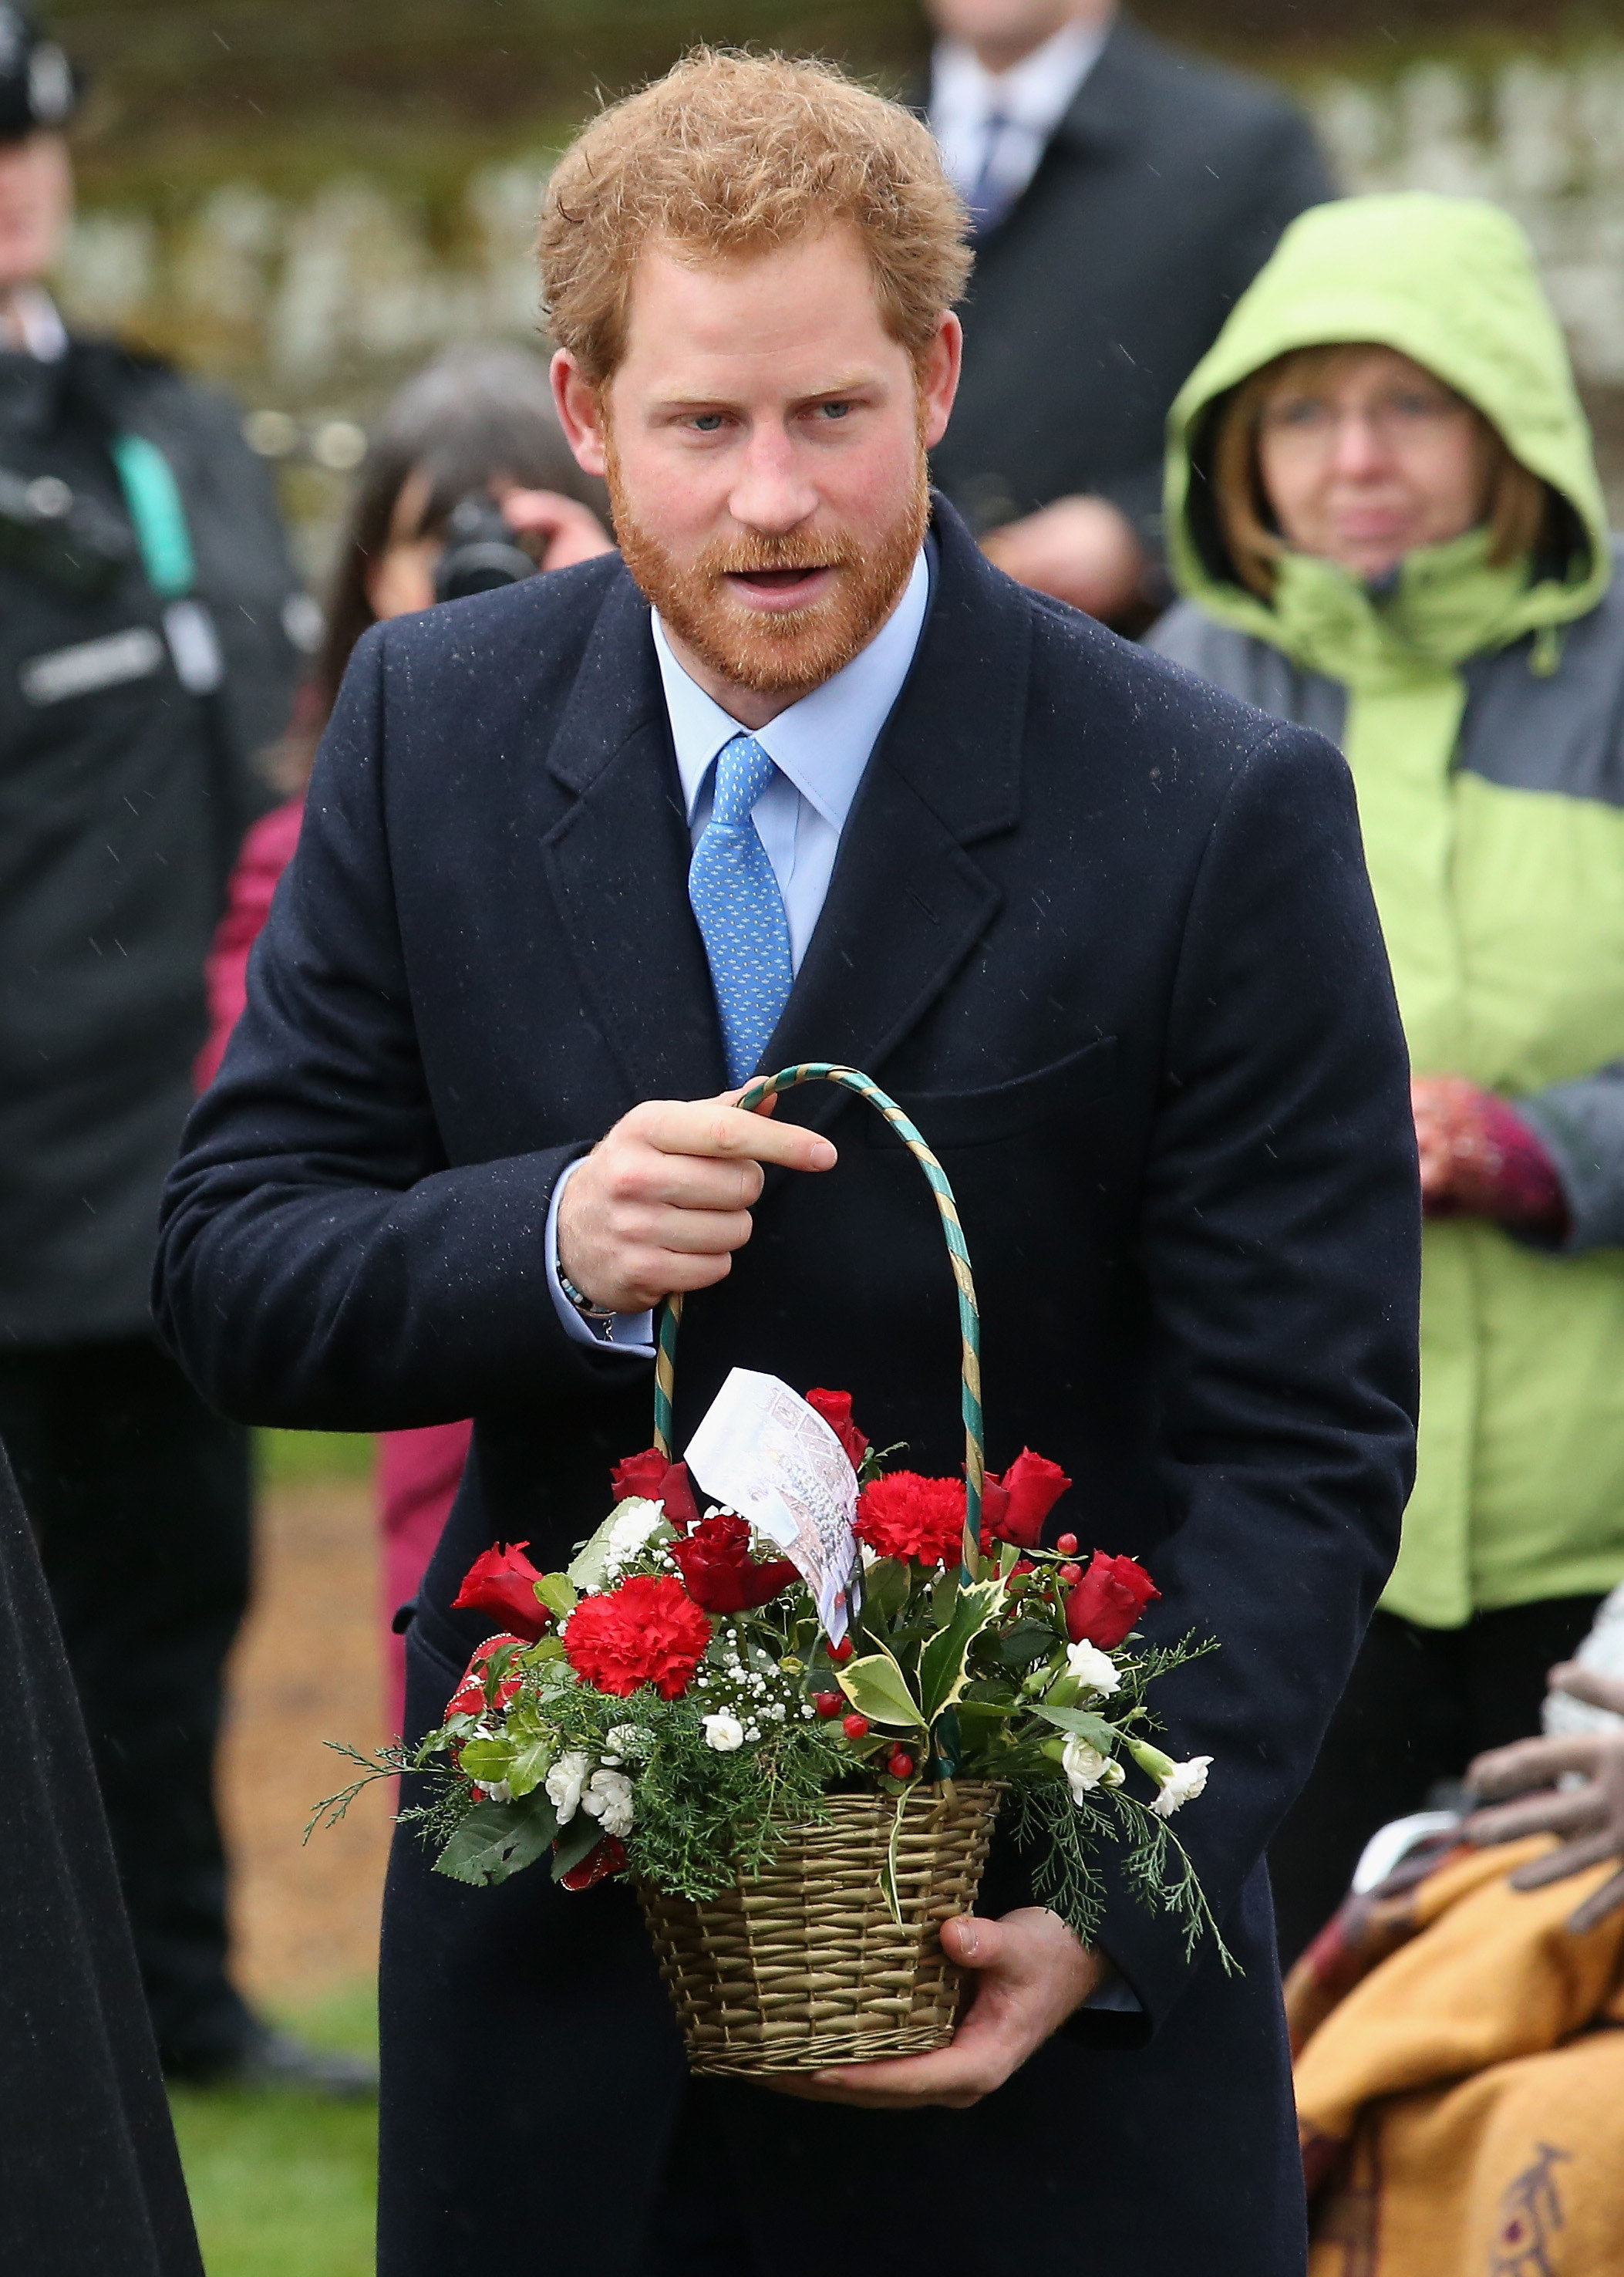 Prince Harry holding flowers